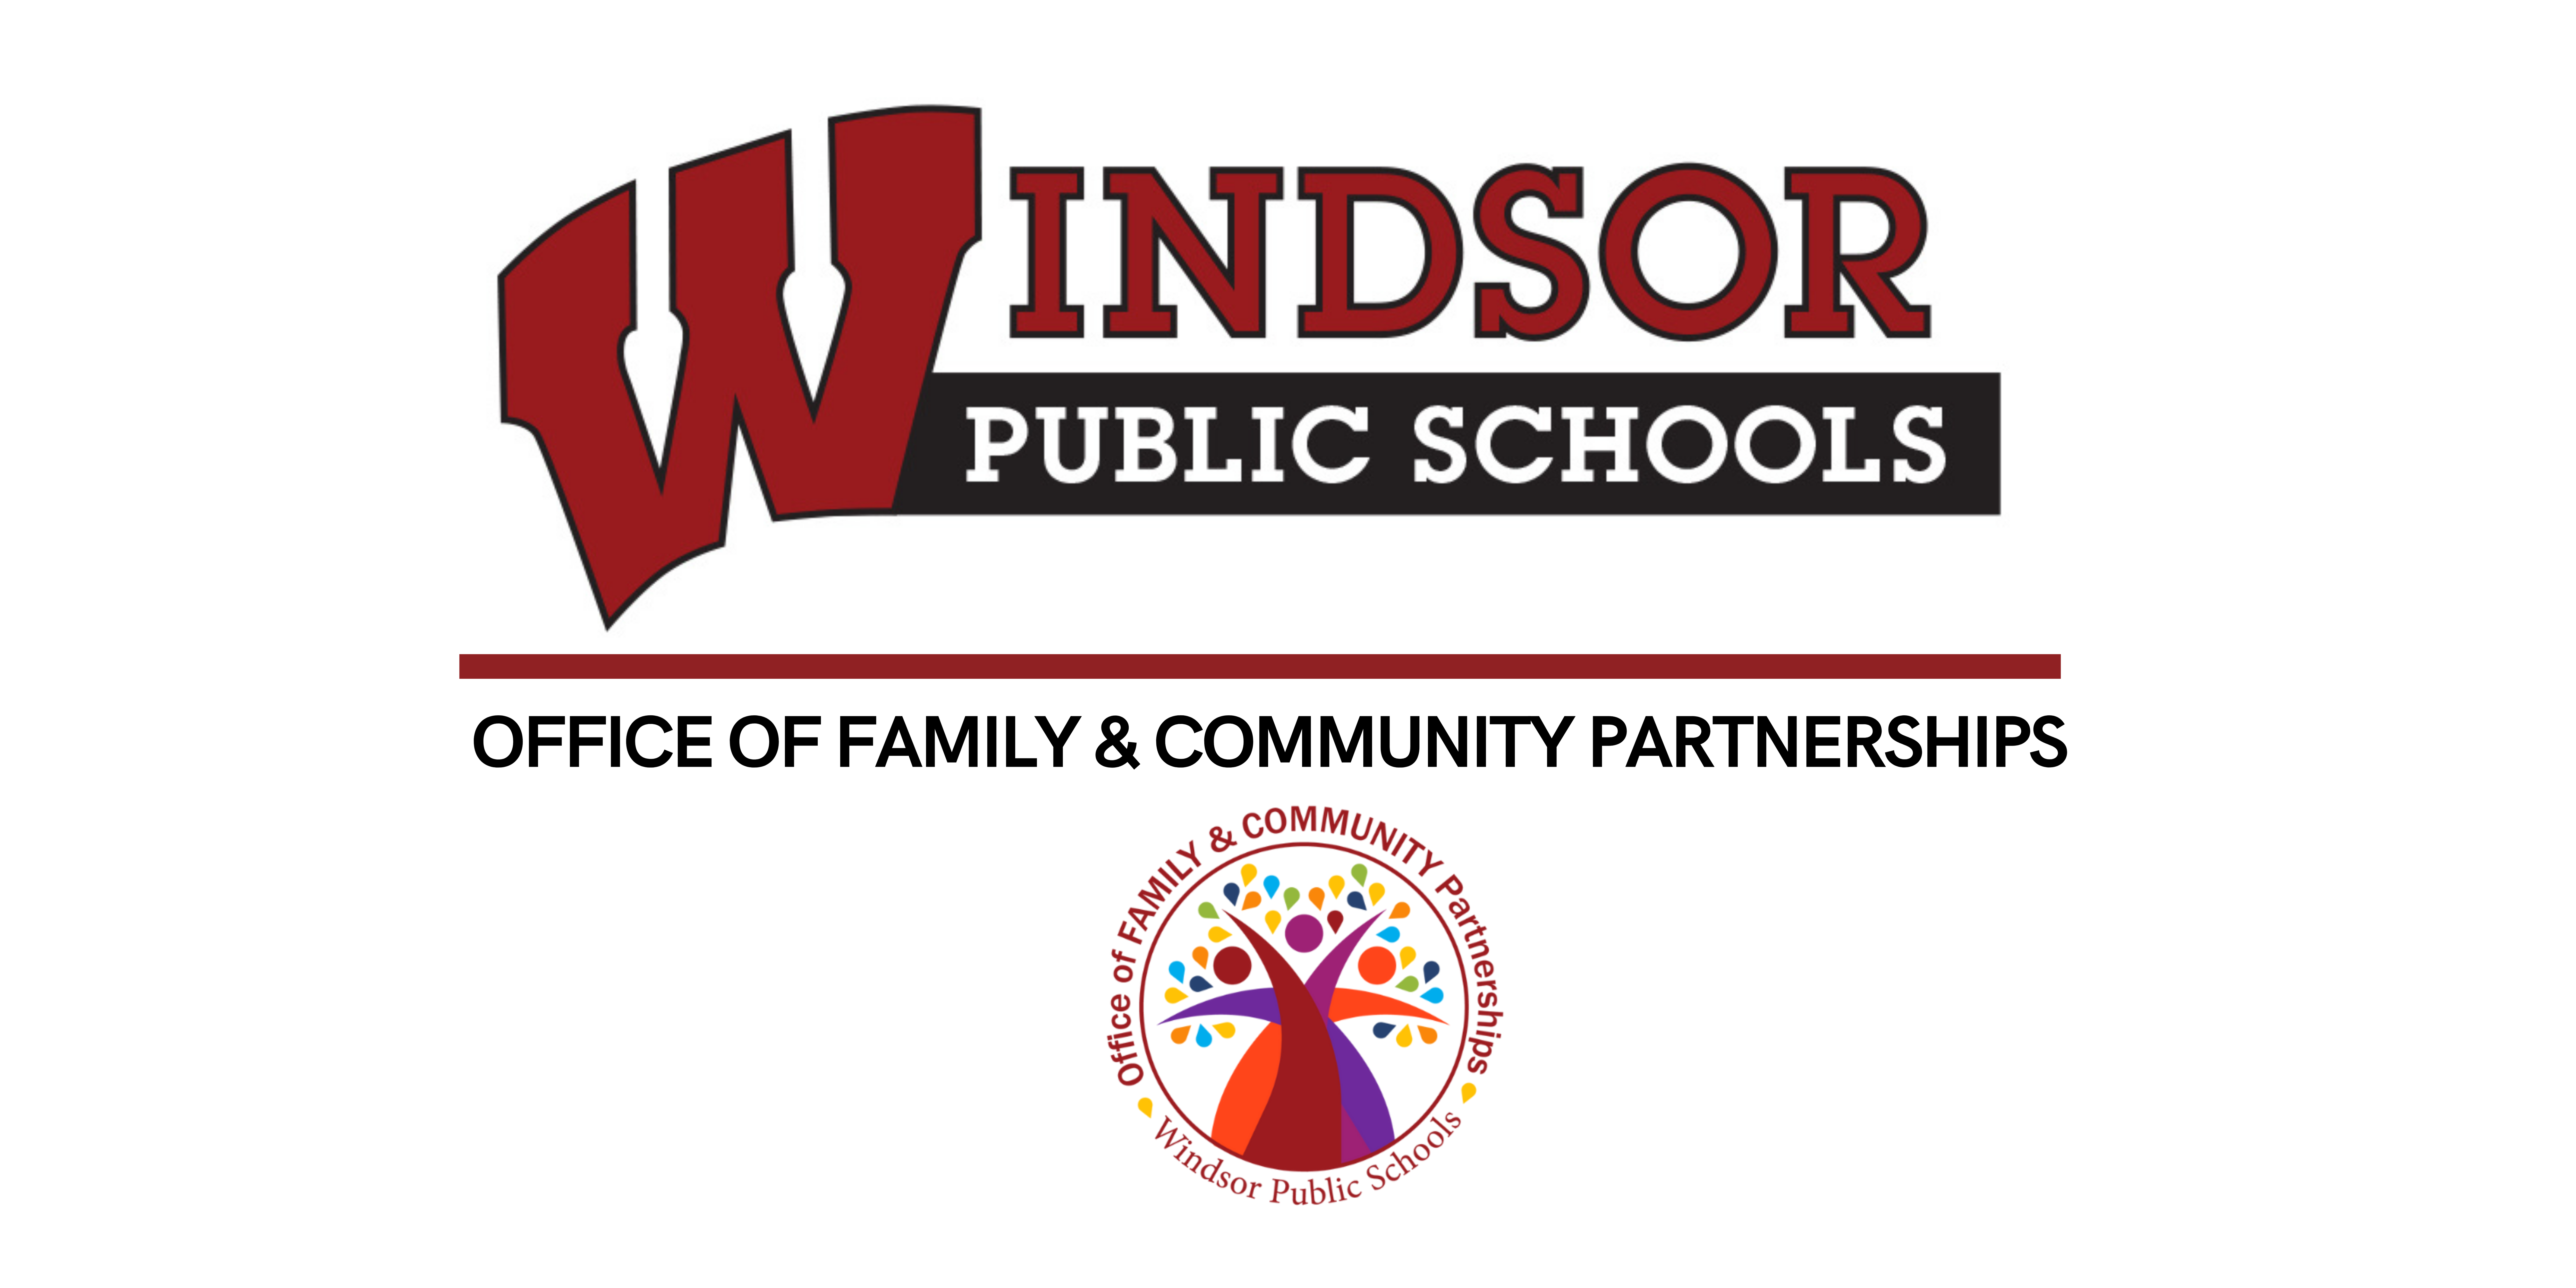 Windsor Public schools logo and the office of family and community partnerships logo